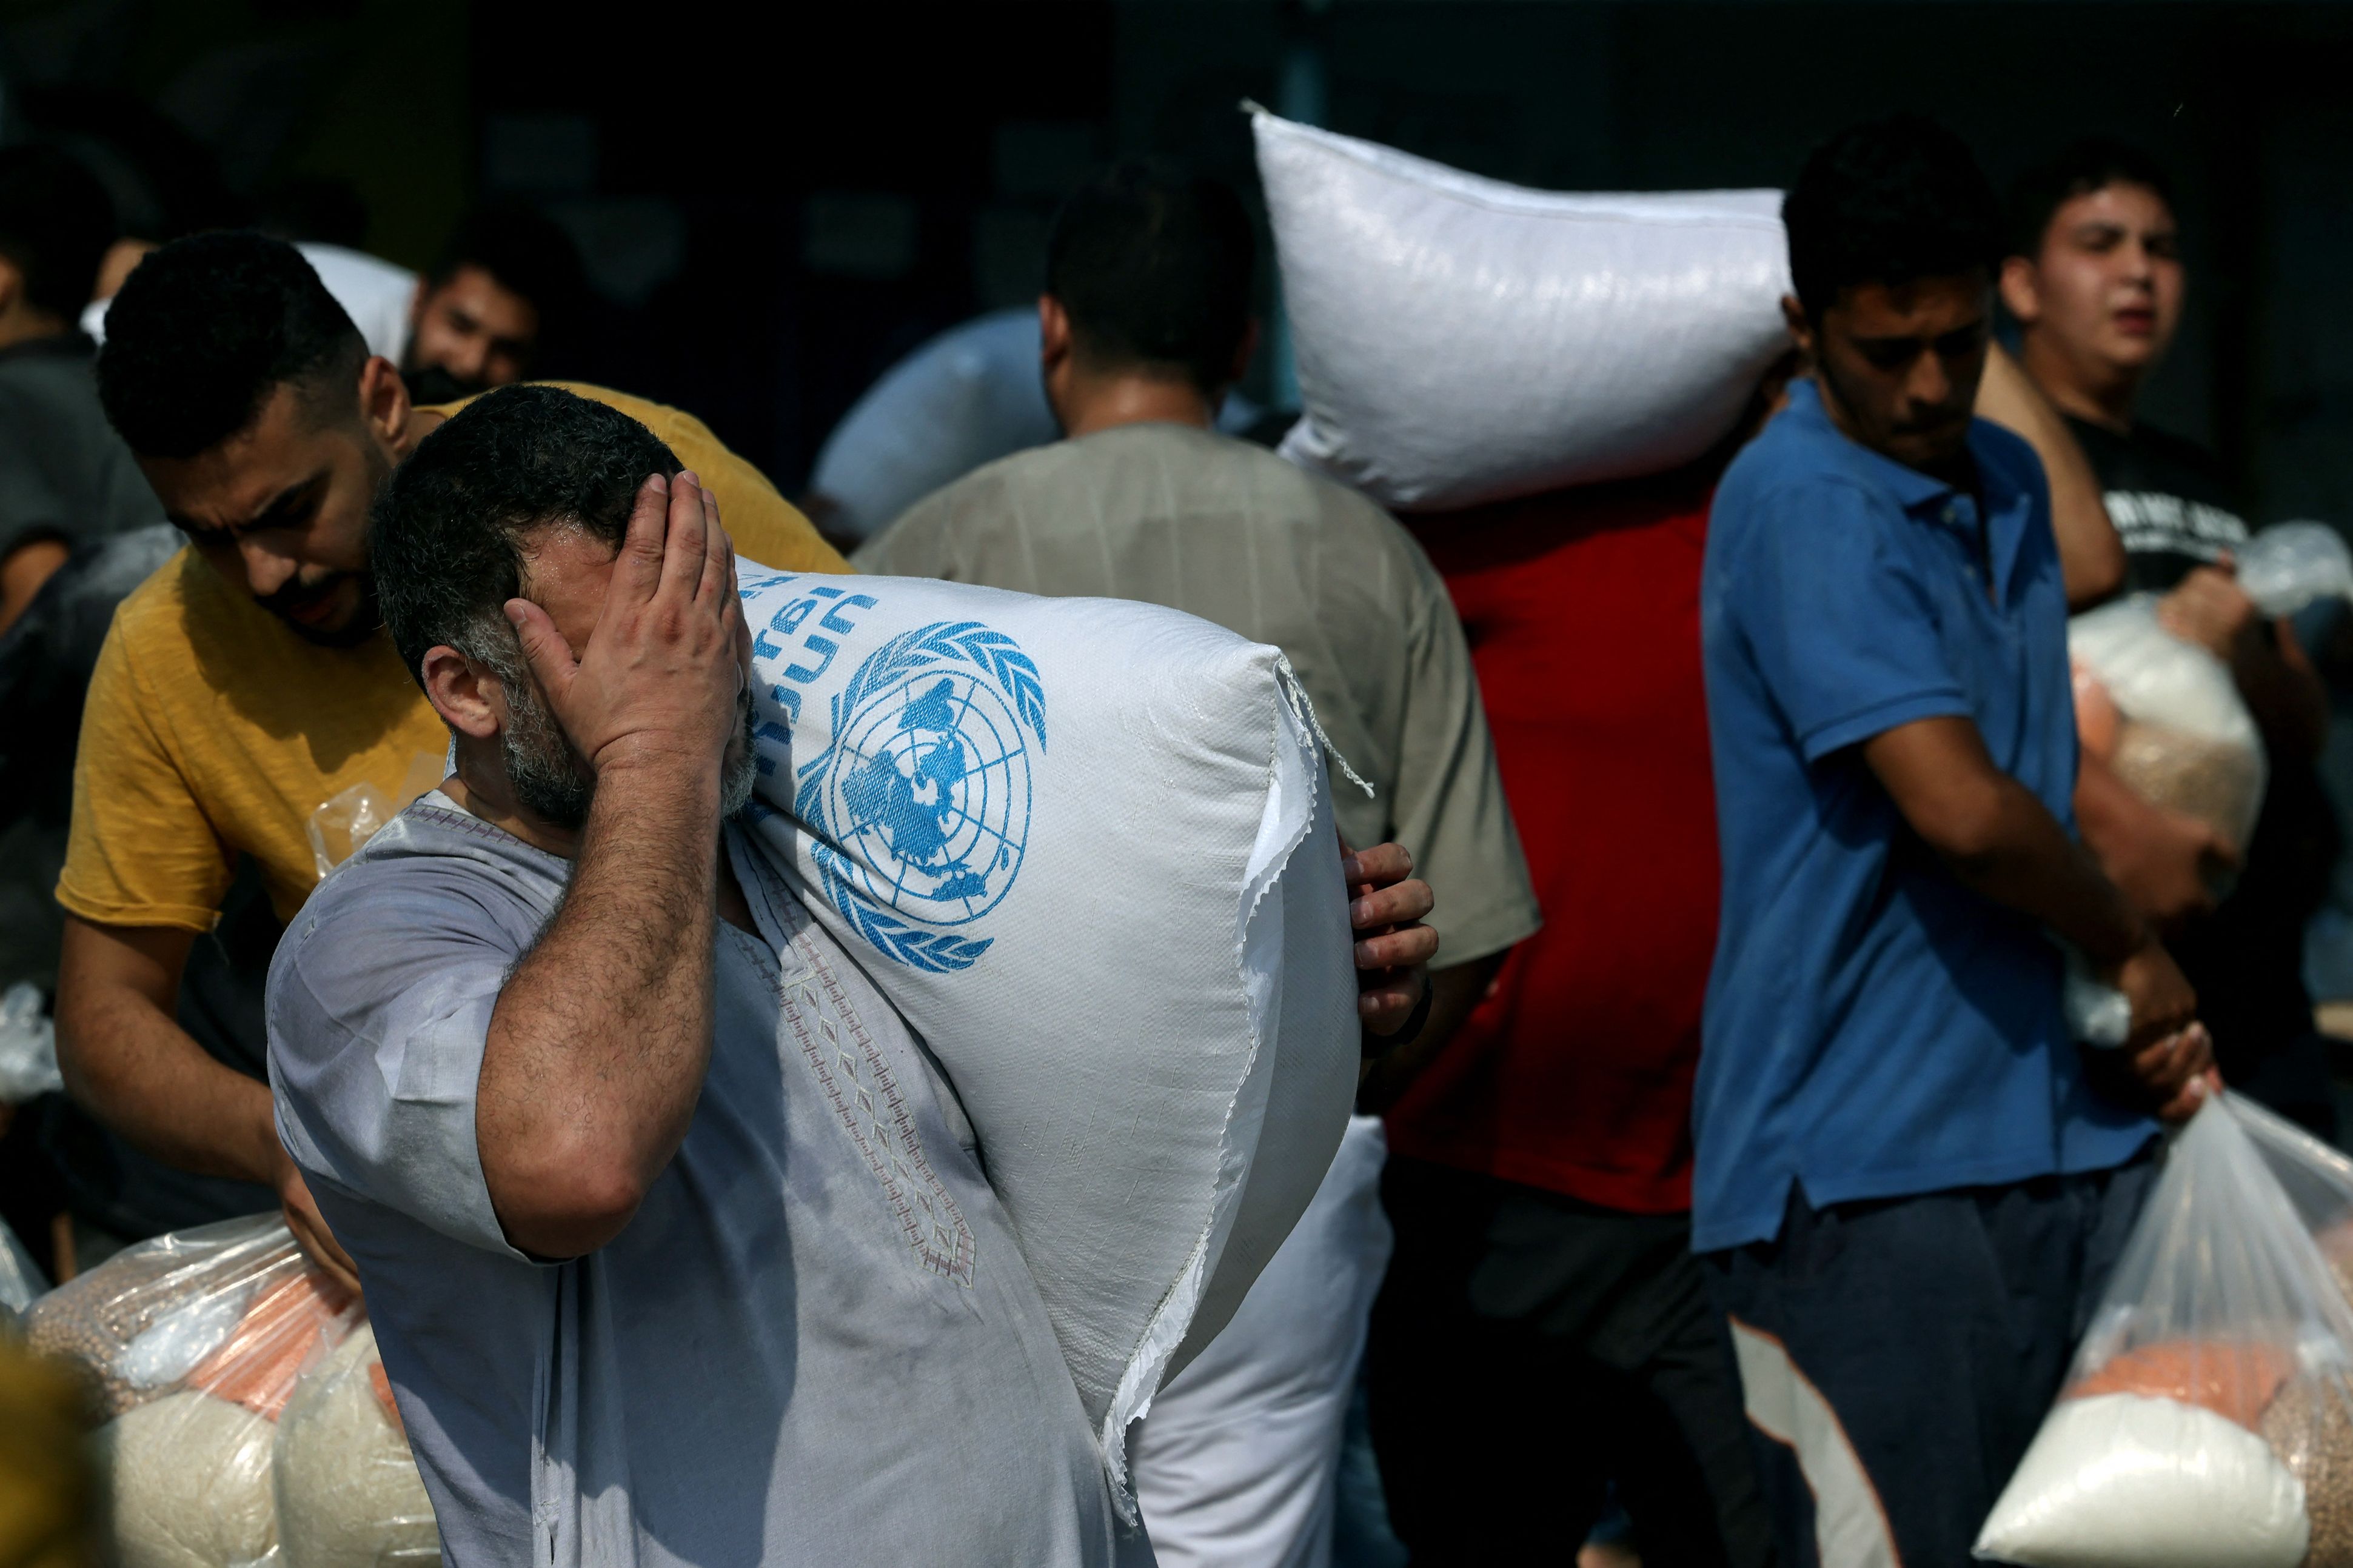 Palestinians storm a UN-run aid supply center, that distributes food to displaced families following Israel's call for more than one million residents in northern Gaza to move south for their safety, in Deir al-Balah, Gaza, on October 28.